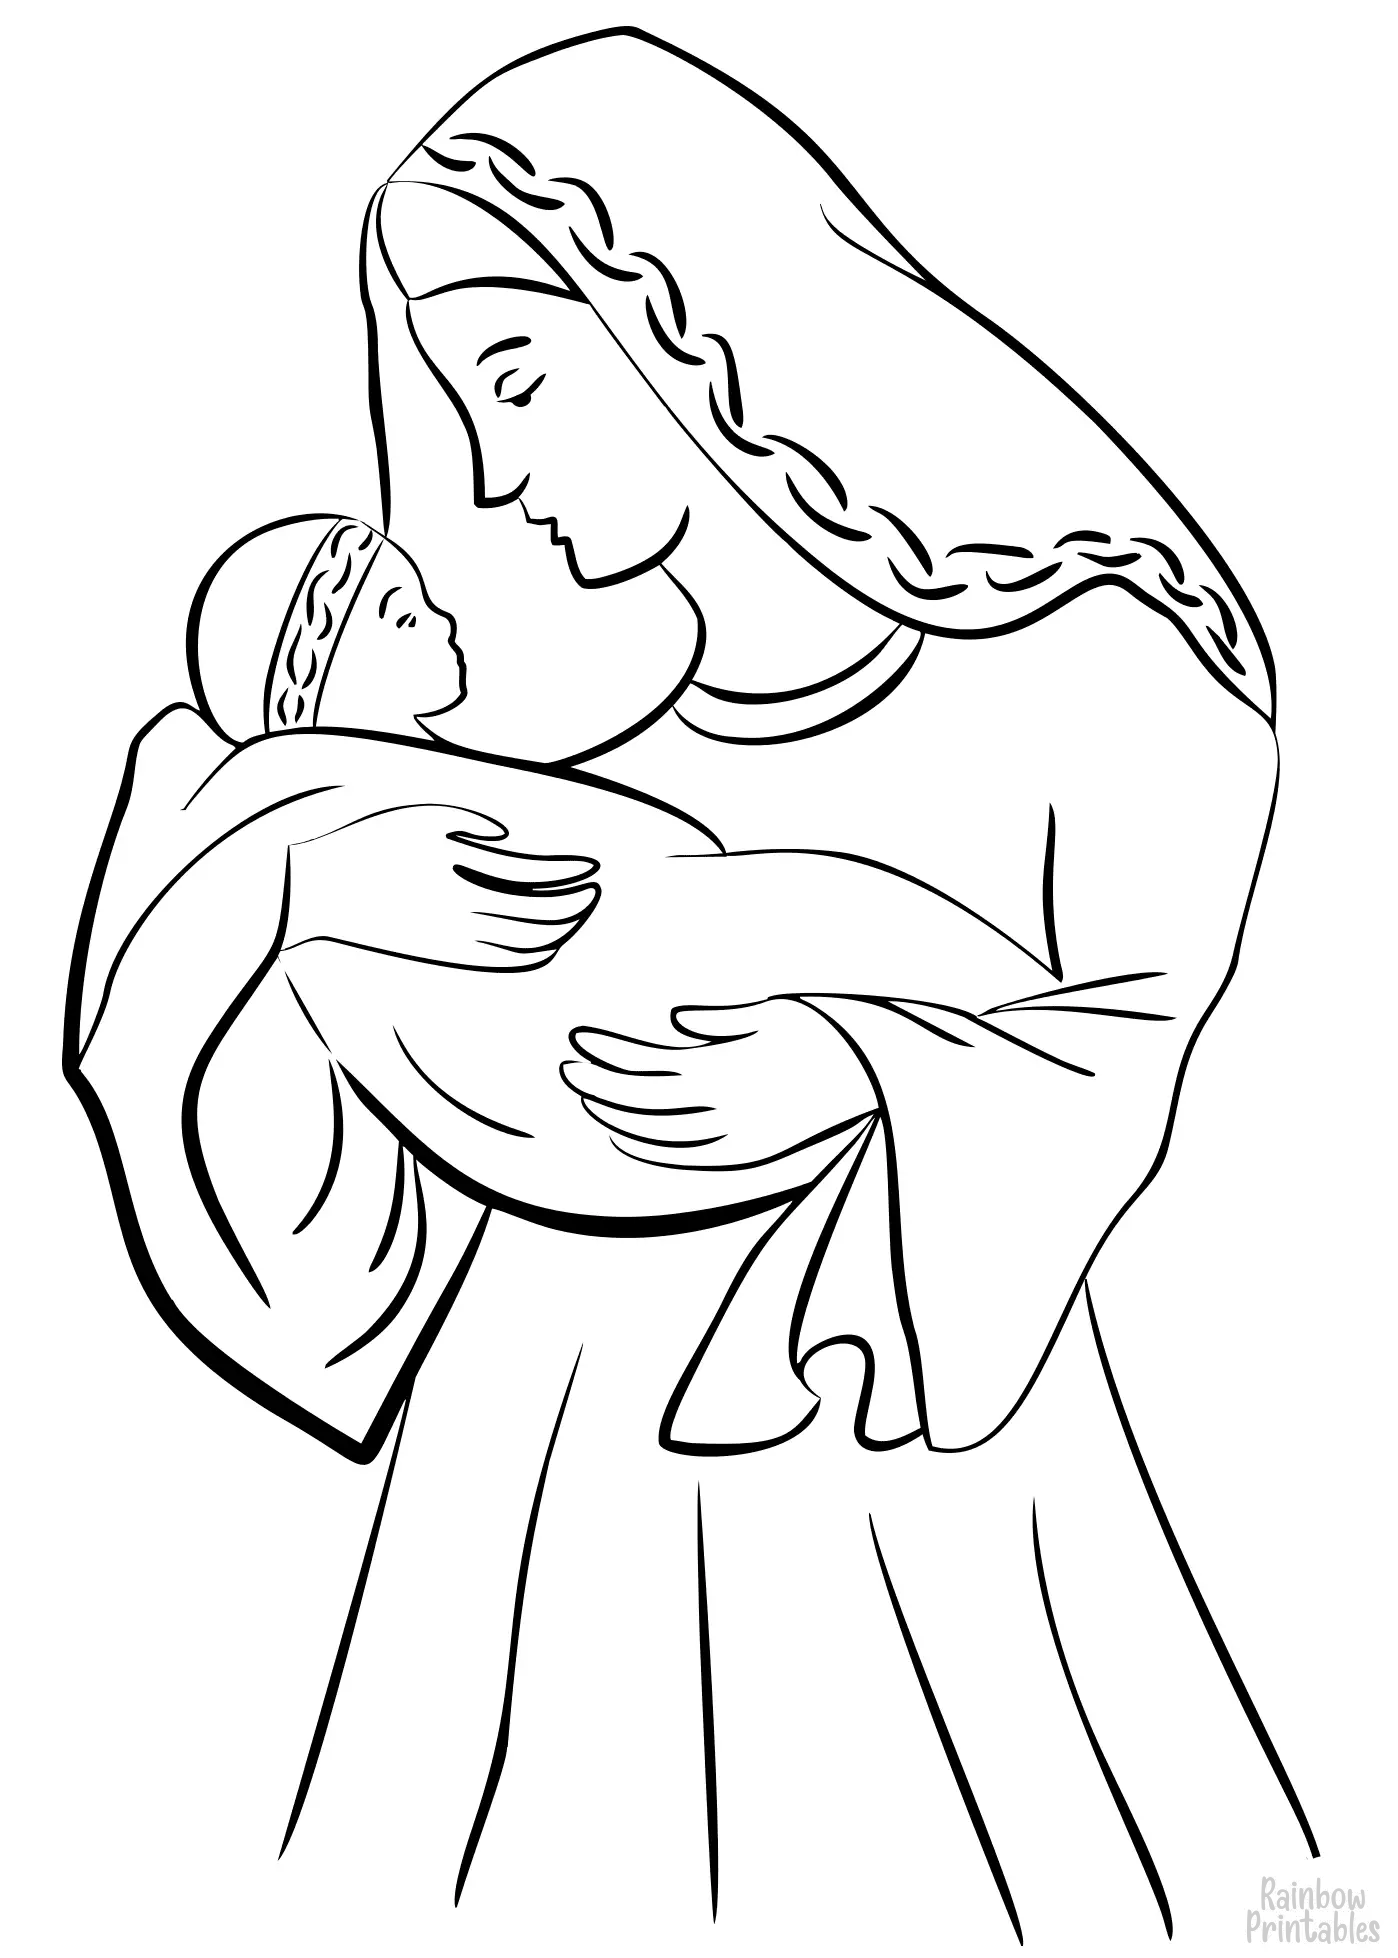 Free-Christian-religion-mother-mary-holding-baby-jesus-coloring-page-for-children-activity-pdf